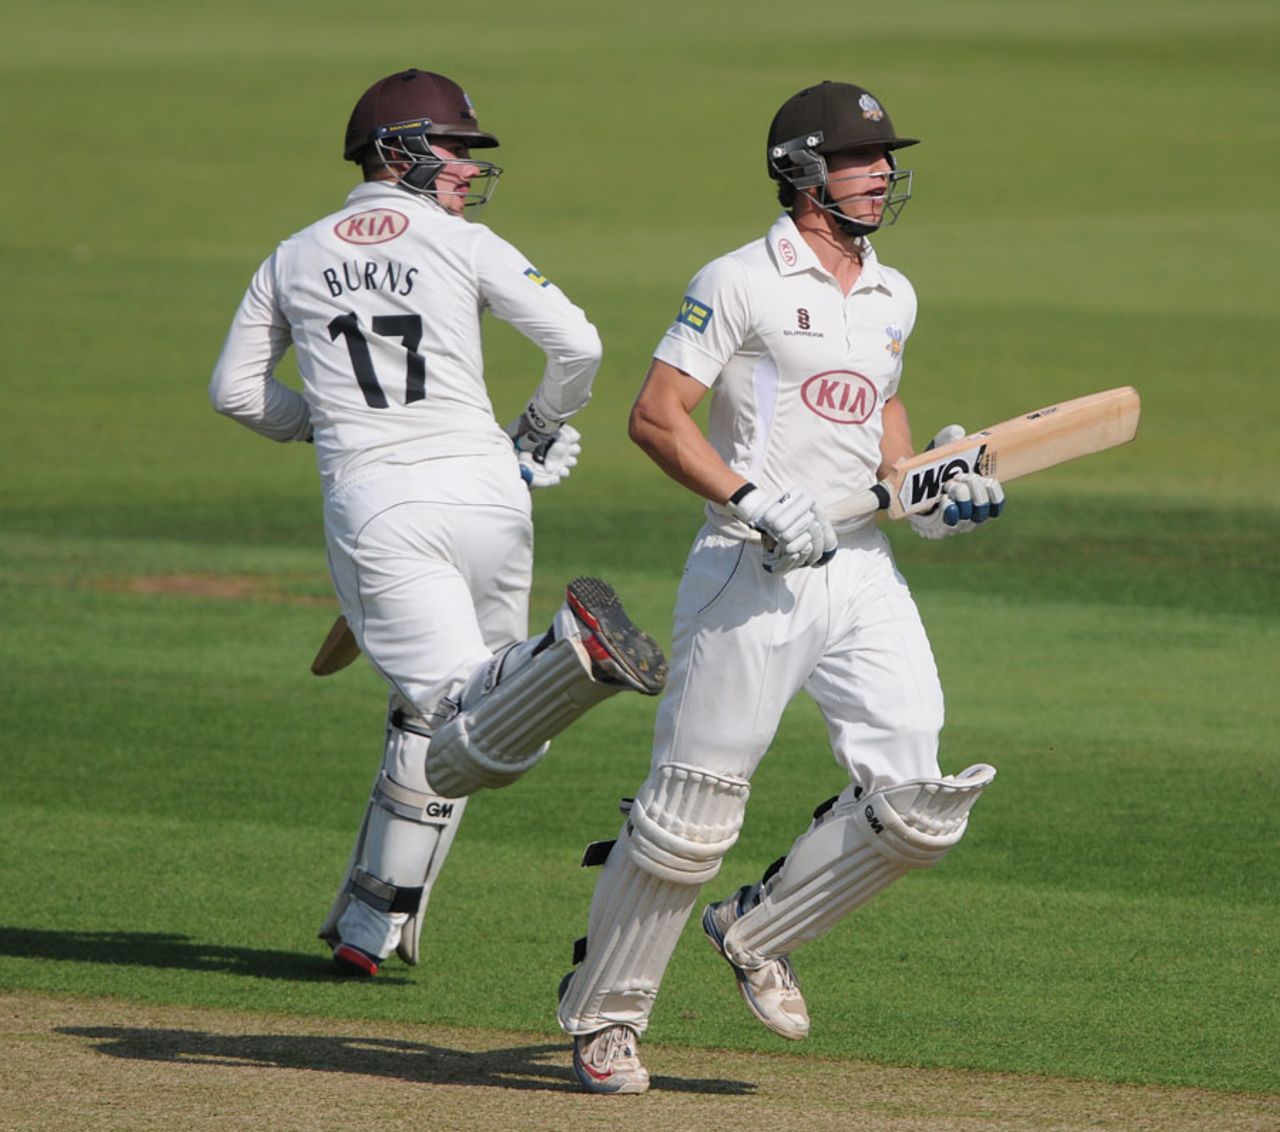 Rory Burns and Zafar Ansari put on 47 for the first wicket, Surrey v Derbyshire, County Championship, Division Two, The Oval, 1st day, September 15, 2014